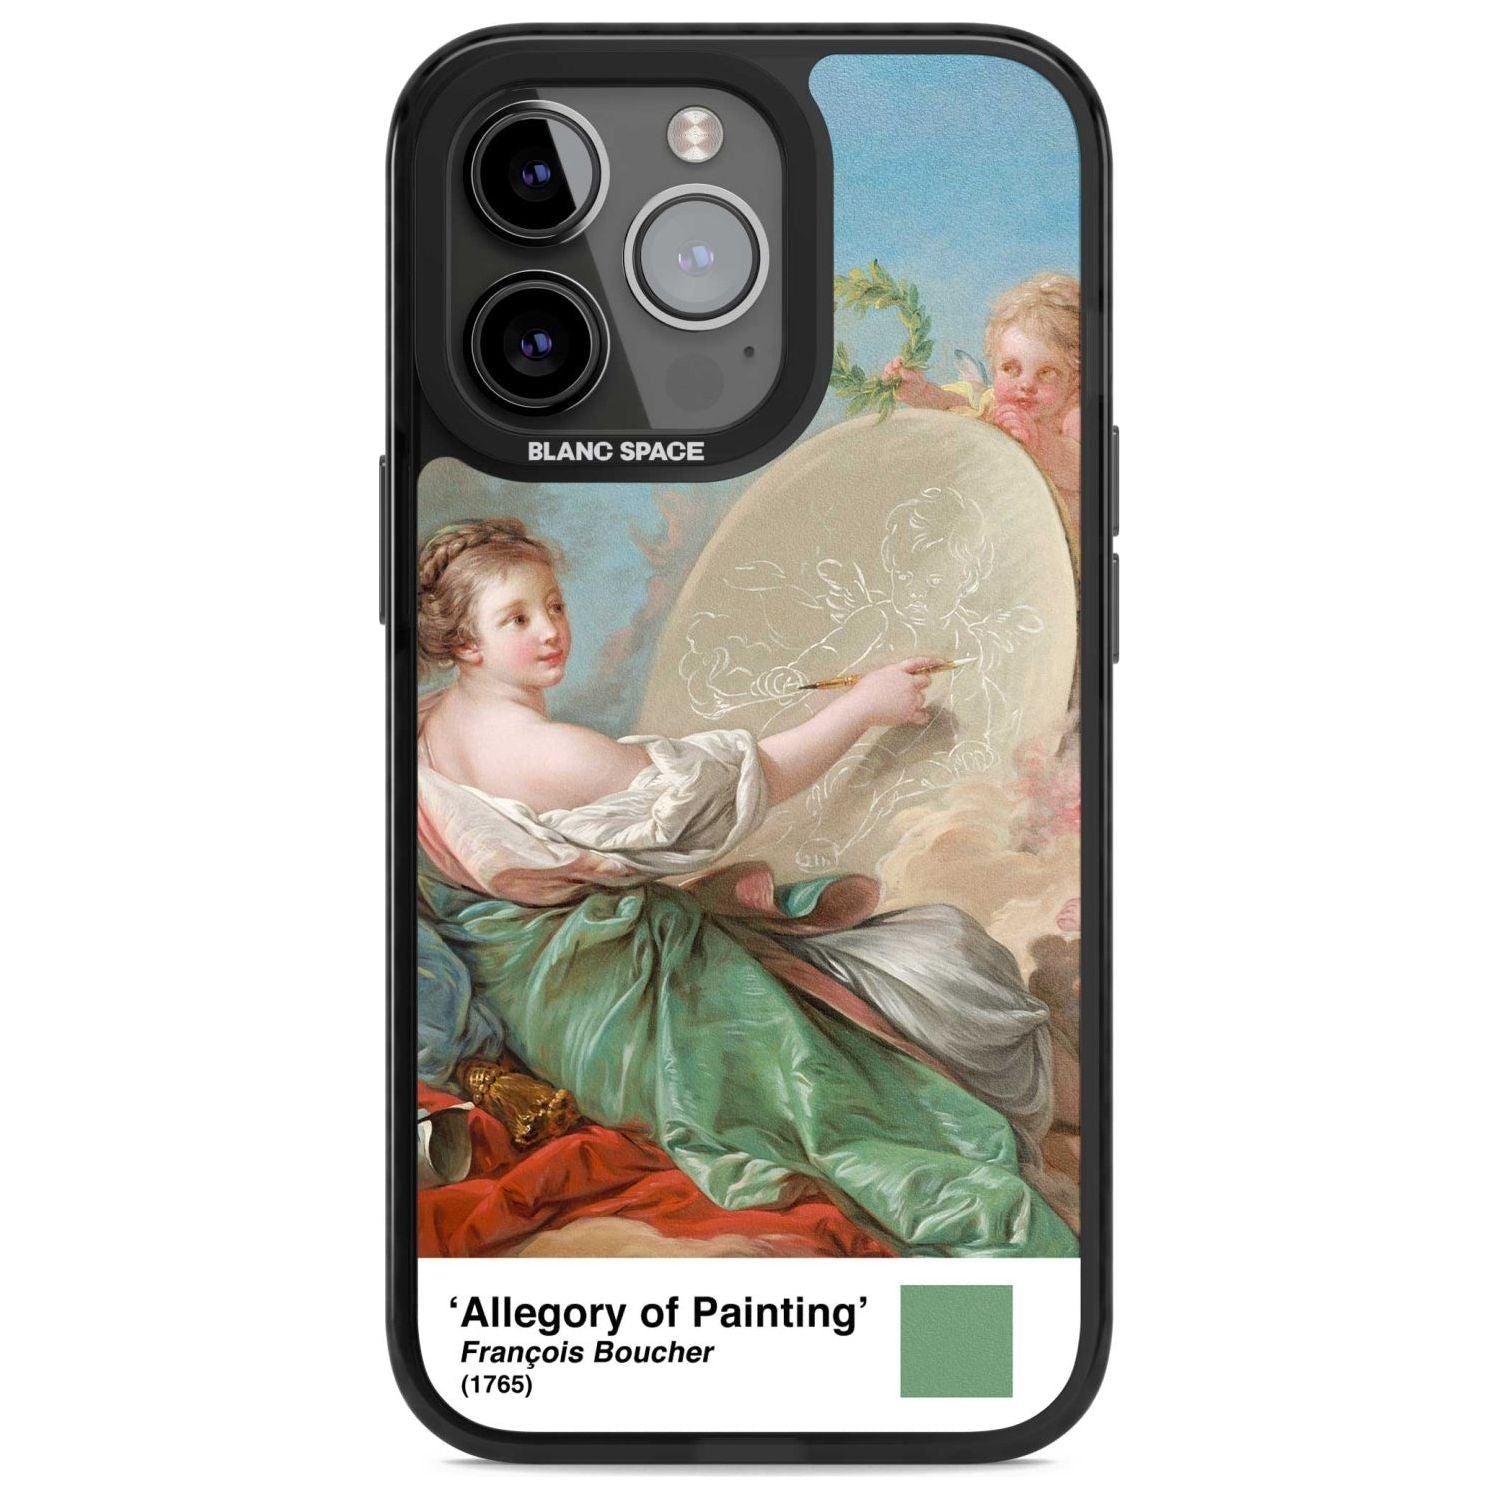 Allegory of Painting Phone Case iPhone 15 Pro Max / Magsafe Black Impact Case,iPhone 15 Pro / Magsafe Black Impact Case,iPhone 14 Pro Max / Magsafe Black Impact Case,iPhone 14 Pro / Magsafe Black Impact Case,iPhone 13 Pro / Magsafe Black Impact Case Blanc Space